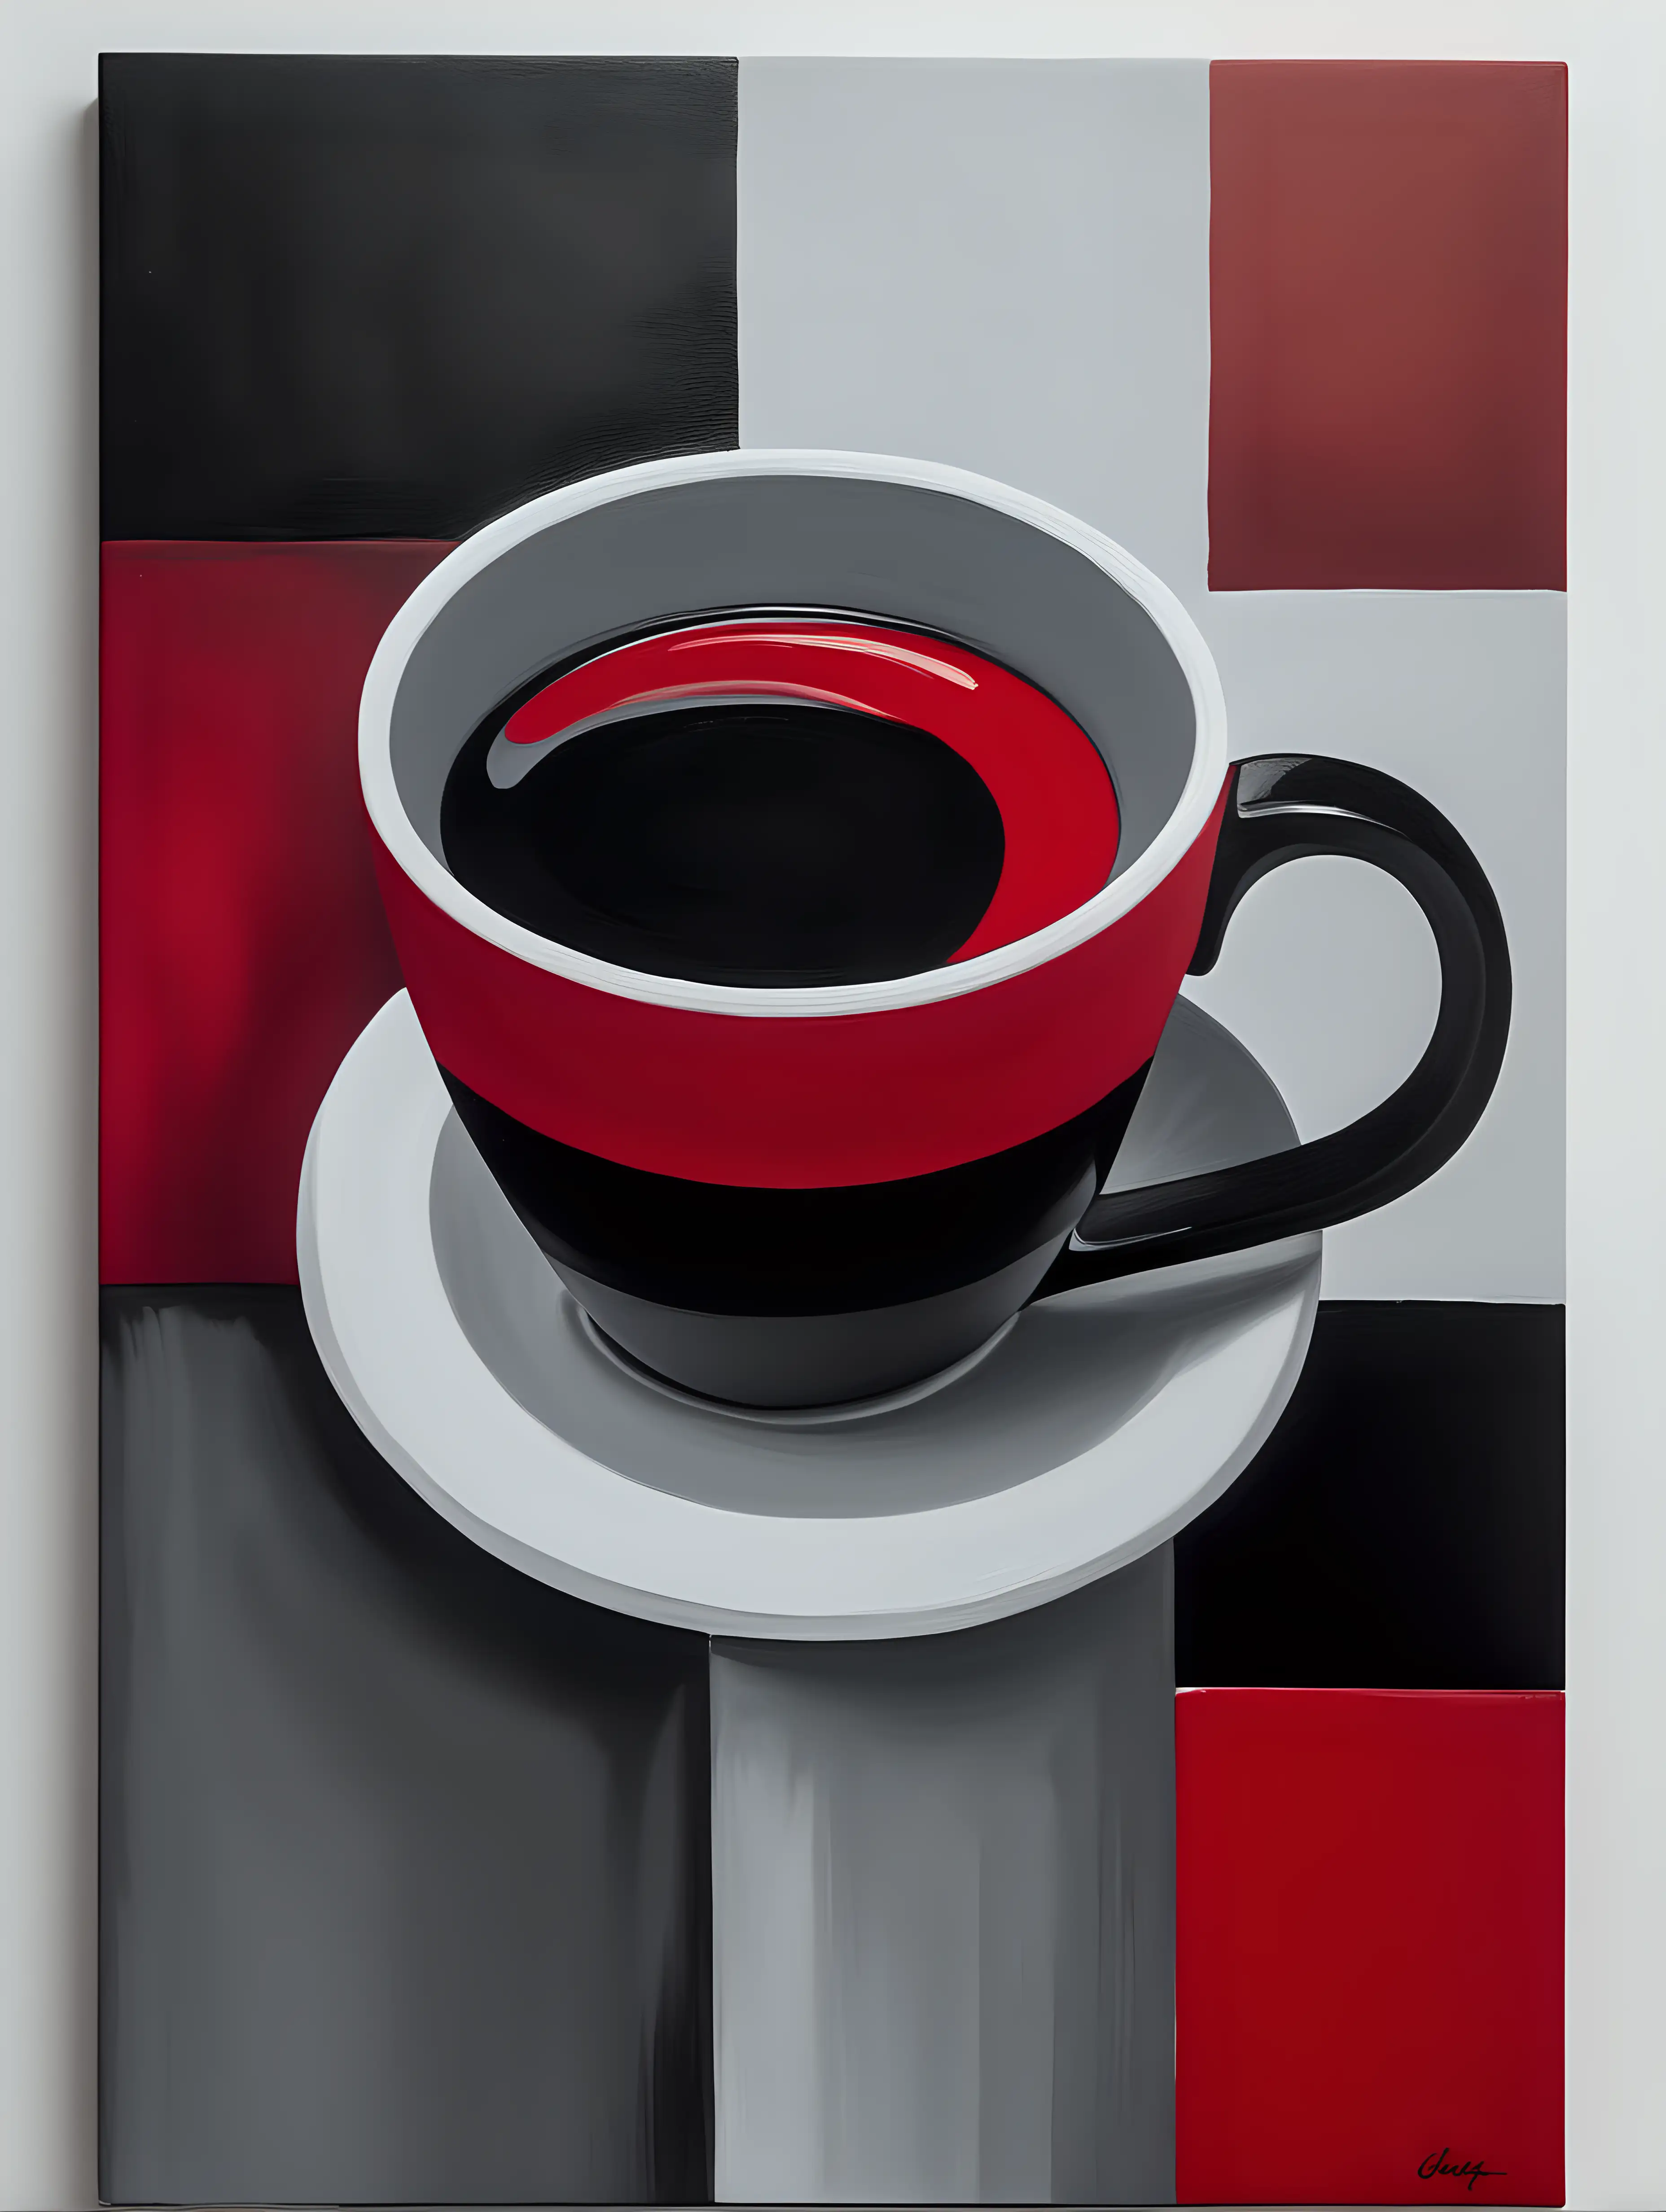 abstract painting using a palette of red, black and gray in a minimalist form. Morning Cup of comfort.